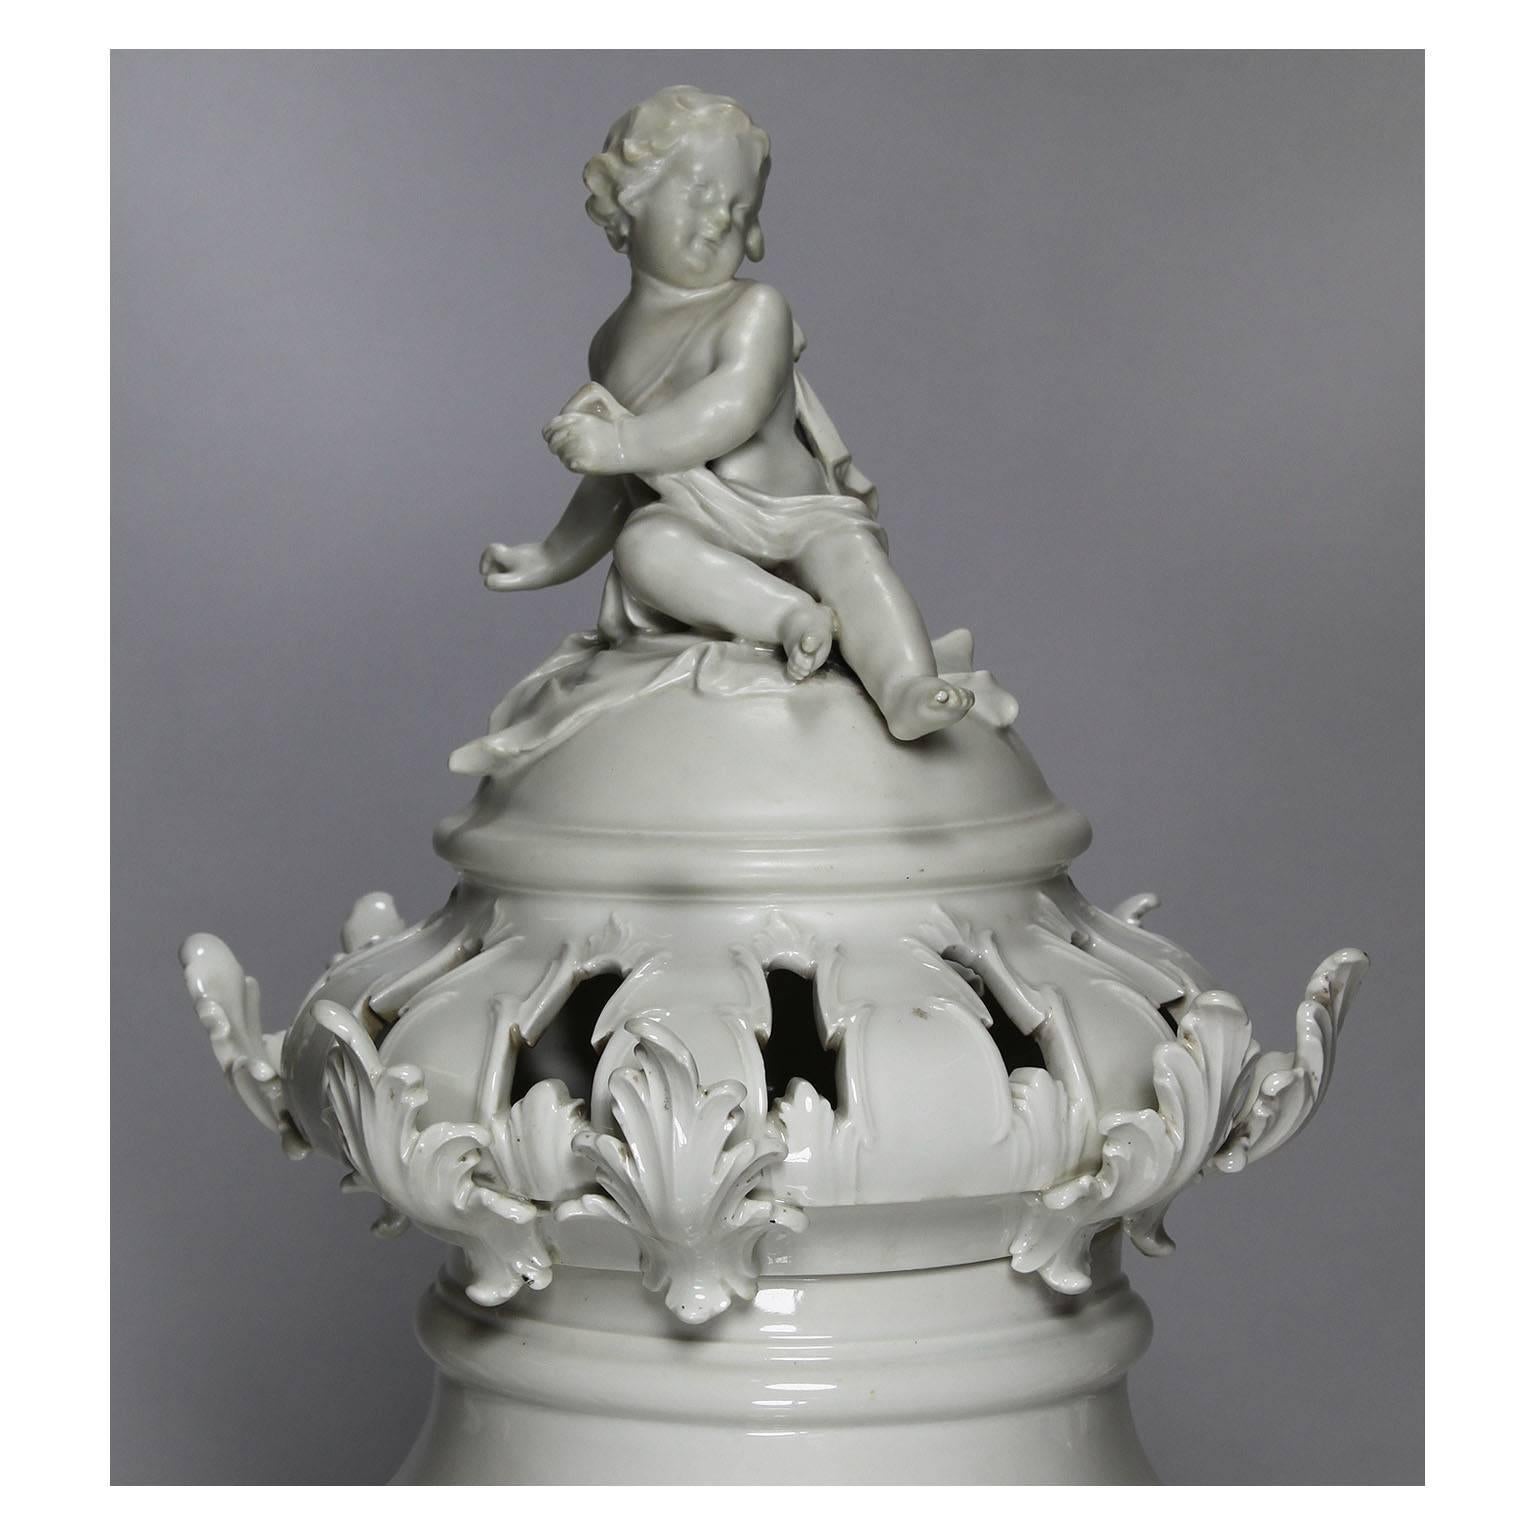 A large and impressive German 19th century Rococo Revival style Berlin KPM porcelain figural exhibition urn vase with cover. The ornately decorated ovoid and rotating white porcelain body in the form of acanthus, rocaille, foliate and ribbons